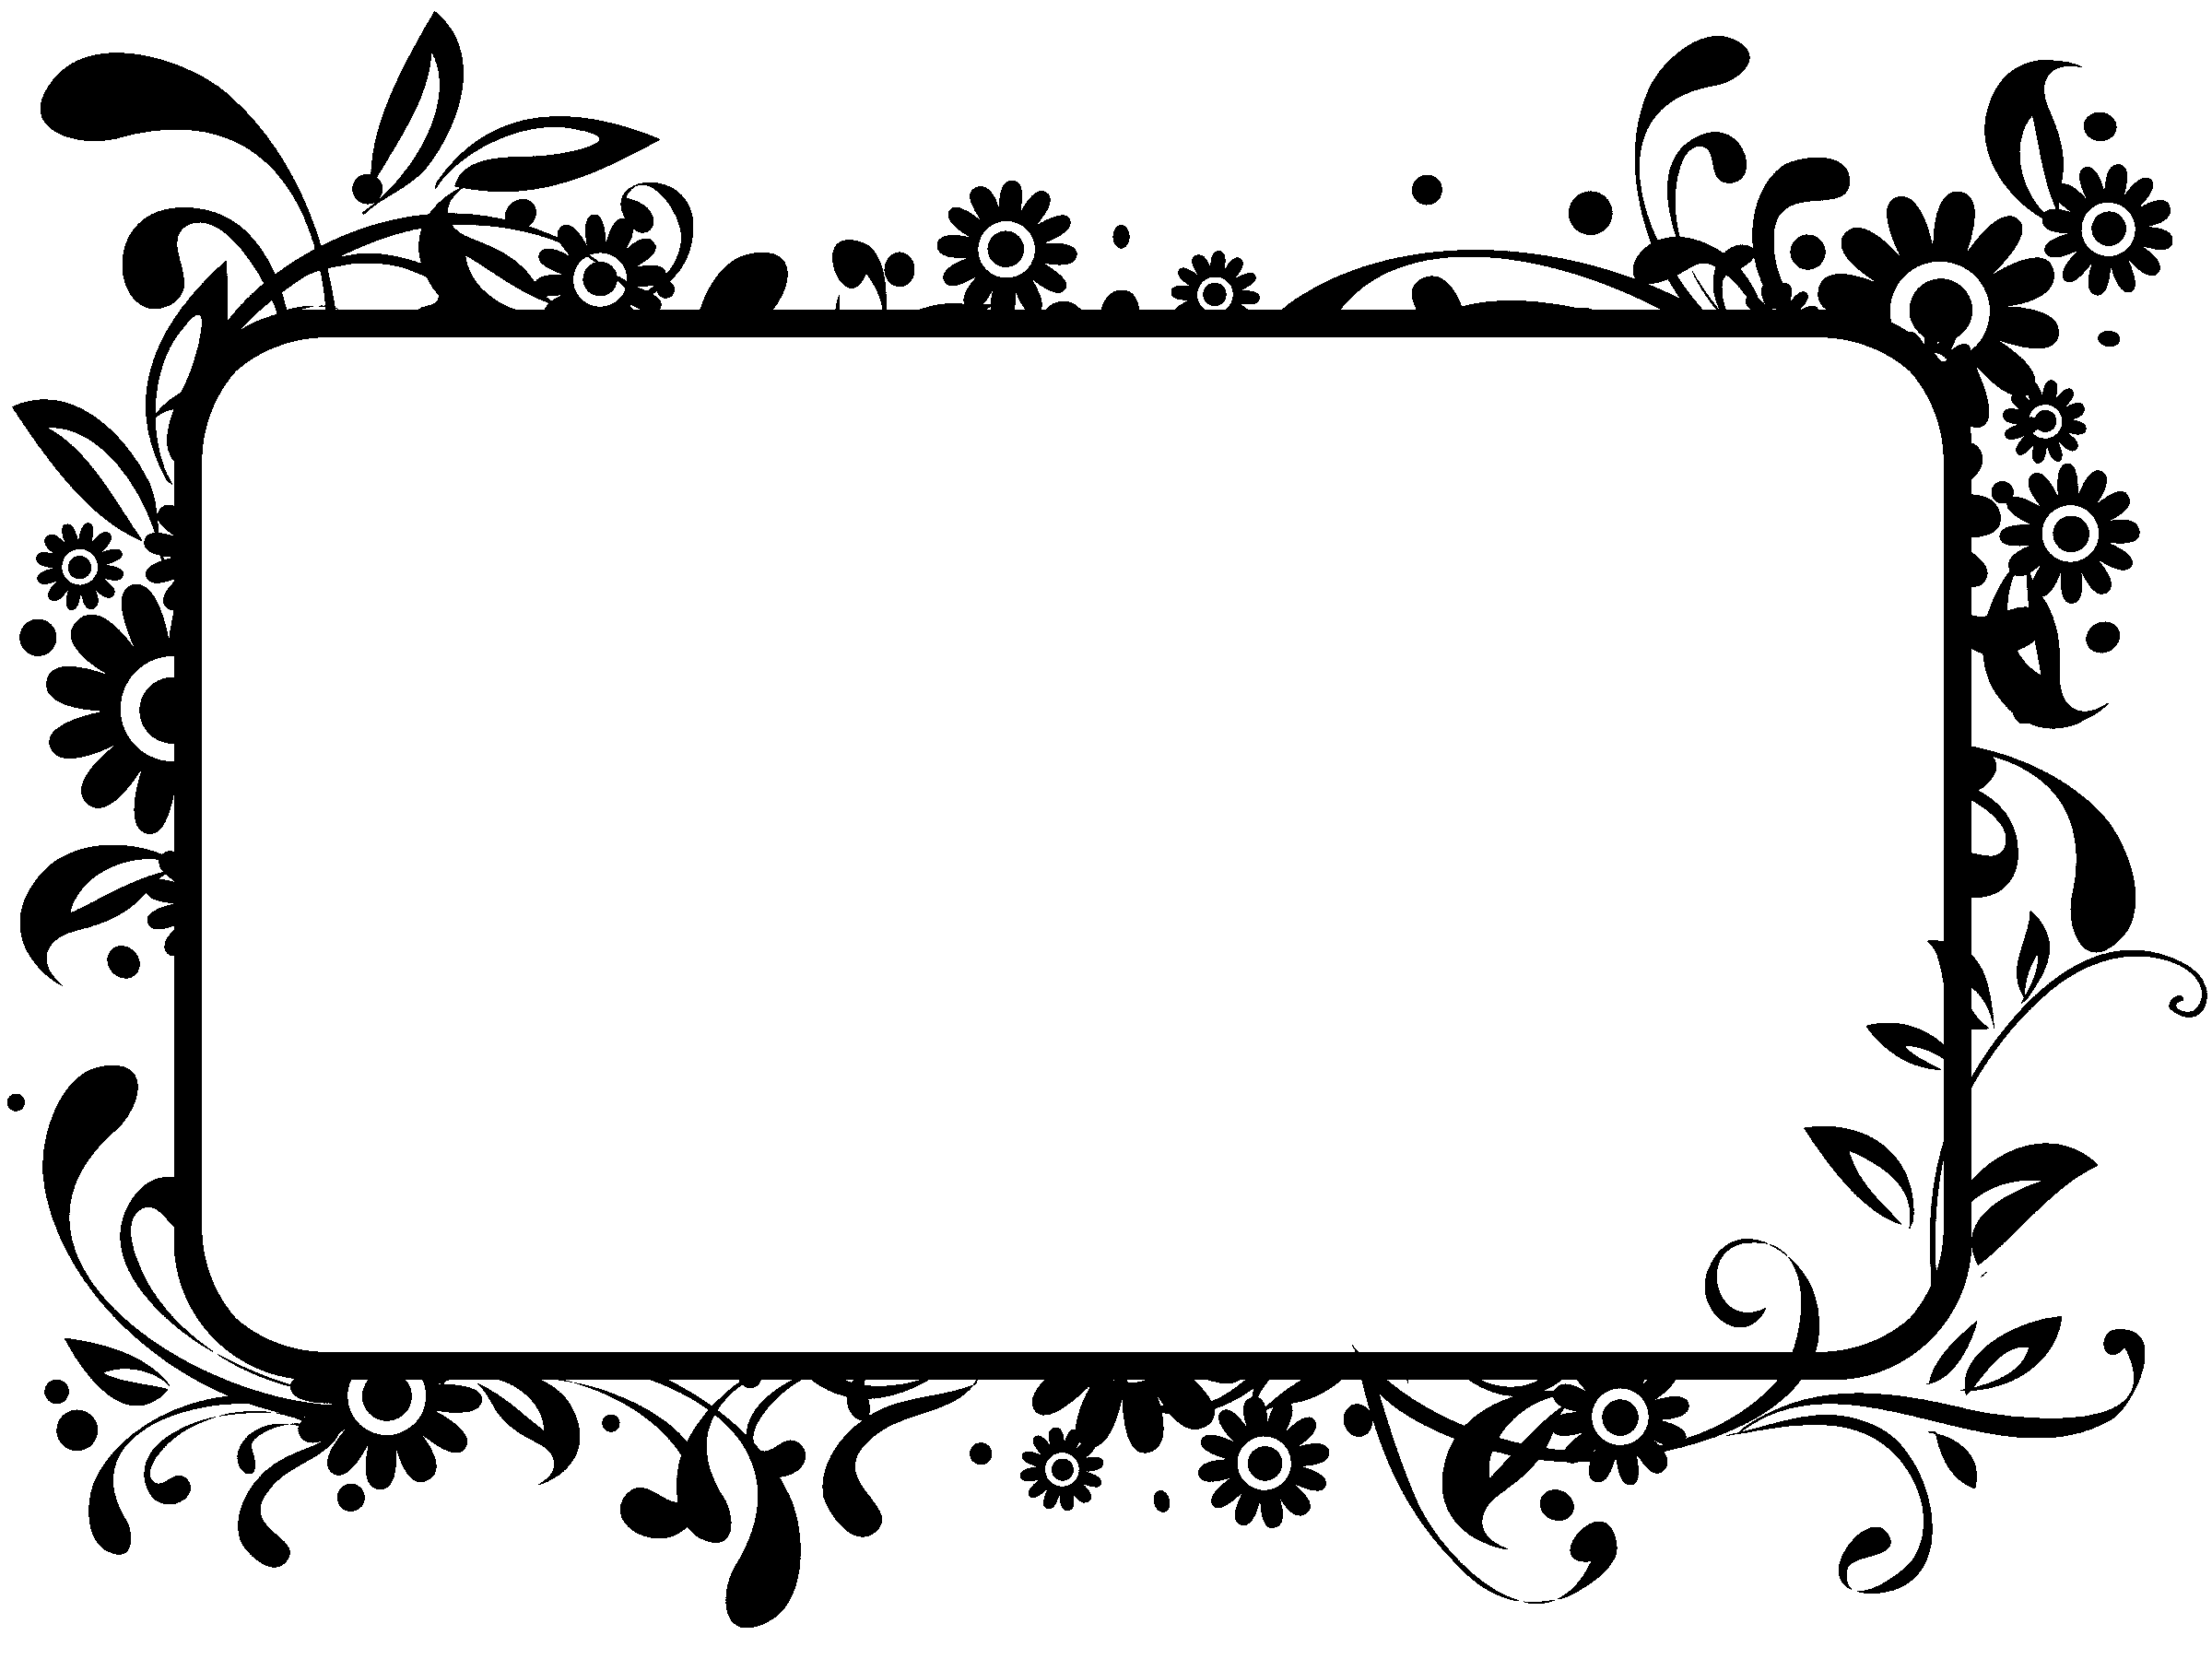 Frame borders on graphics fairy vintage clip art and black